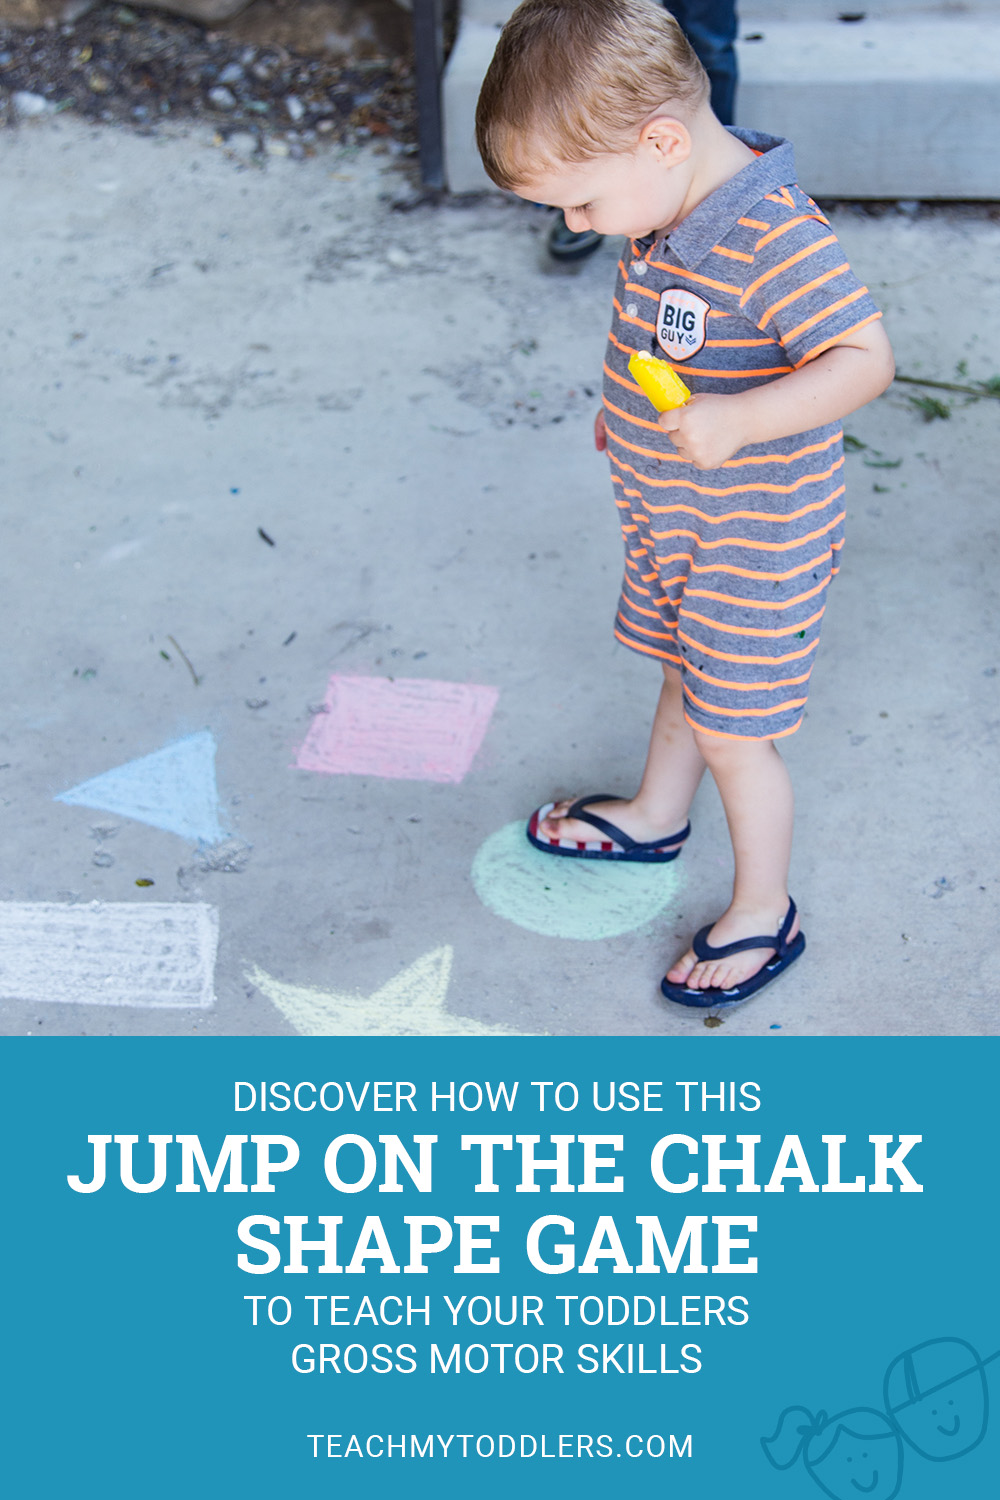 Discover how to use this jump on the chalk shapes game to teach toddlers gross motor skills